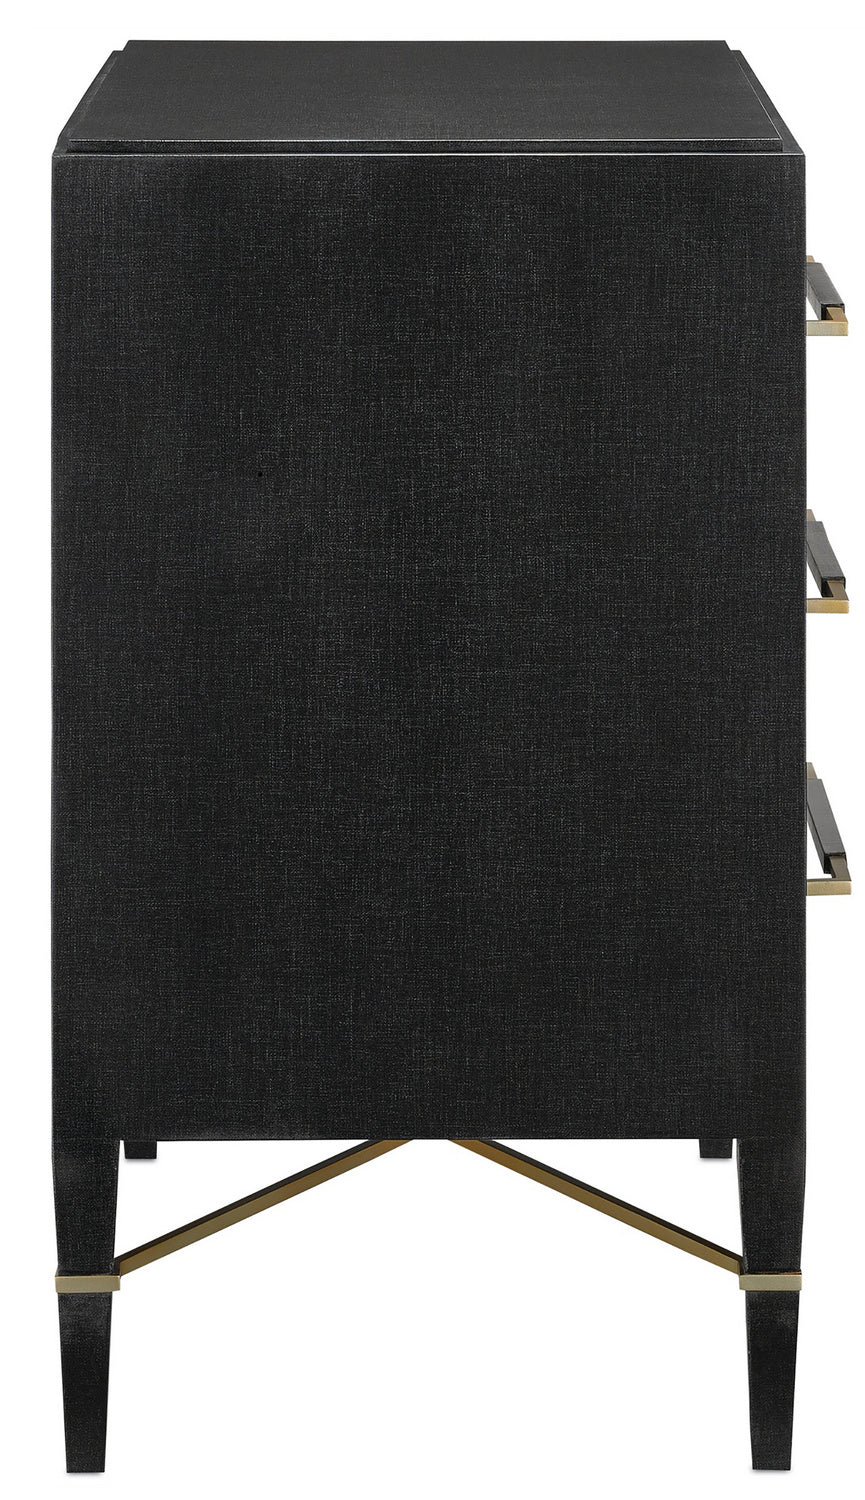 Chest from the Verona collection in Black Lacquered Linen/Champagne finish